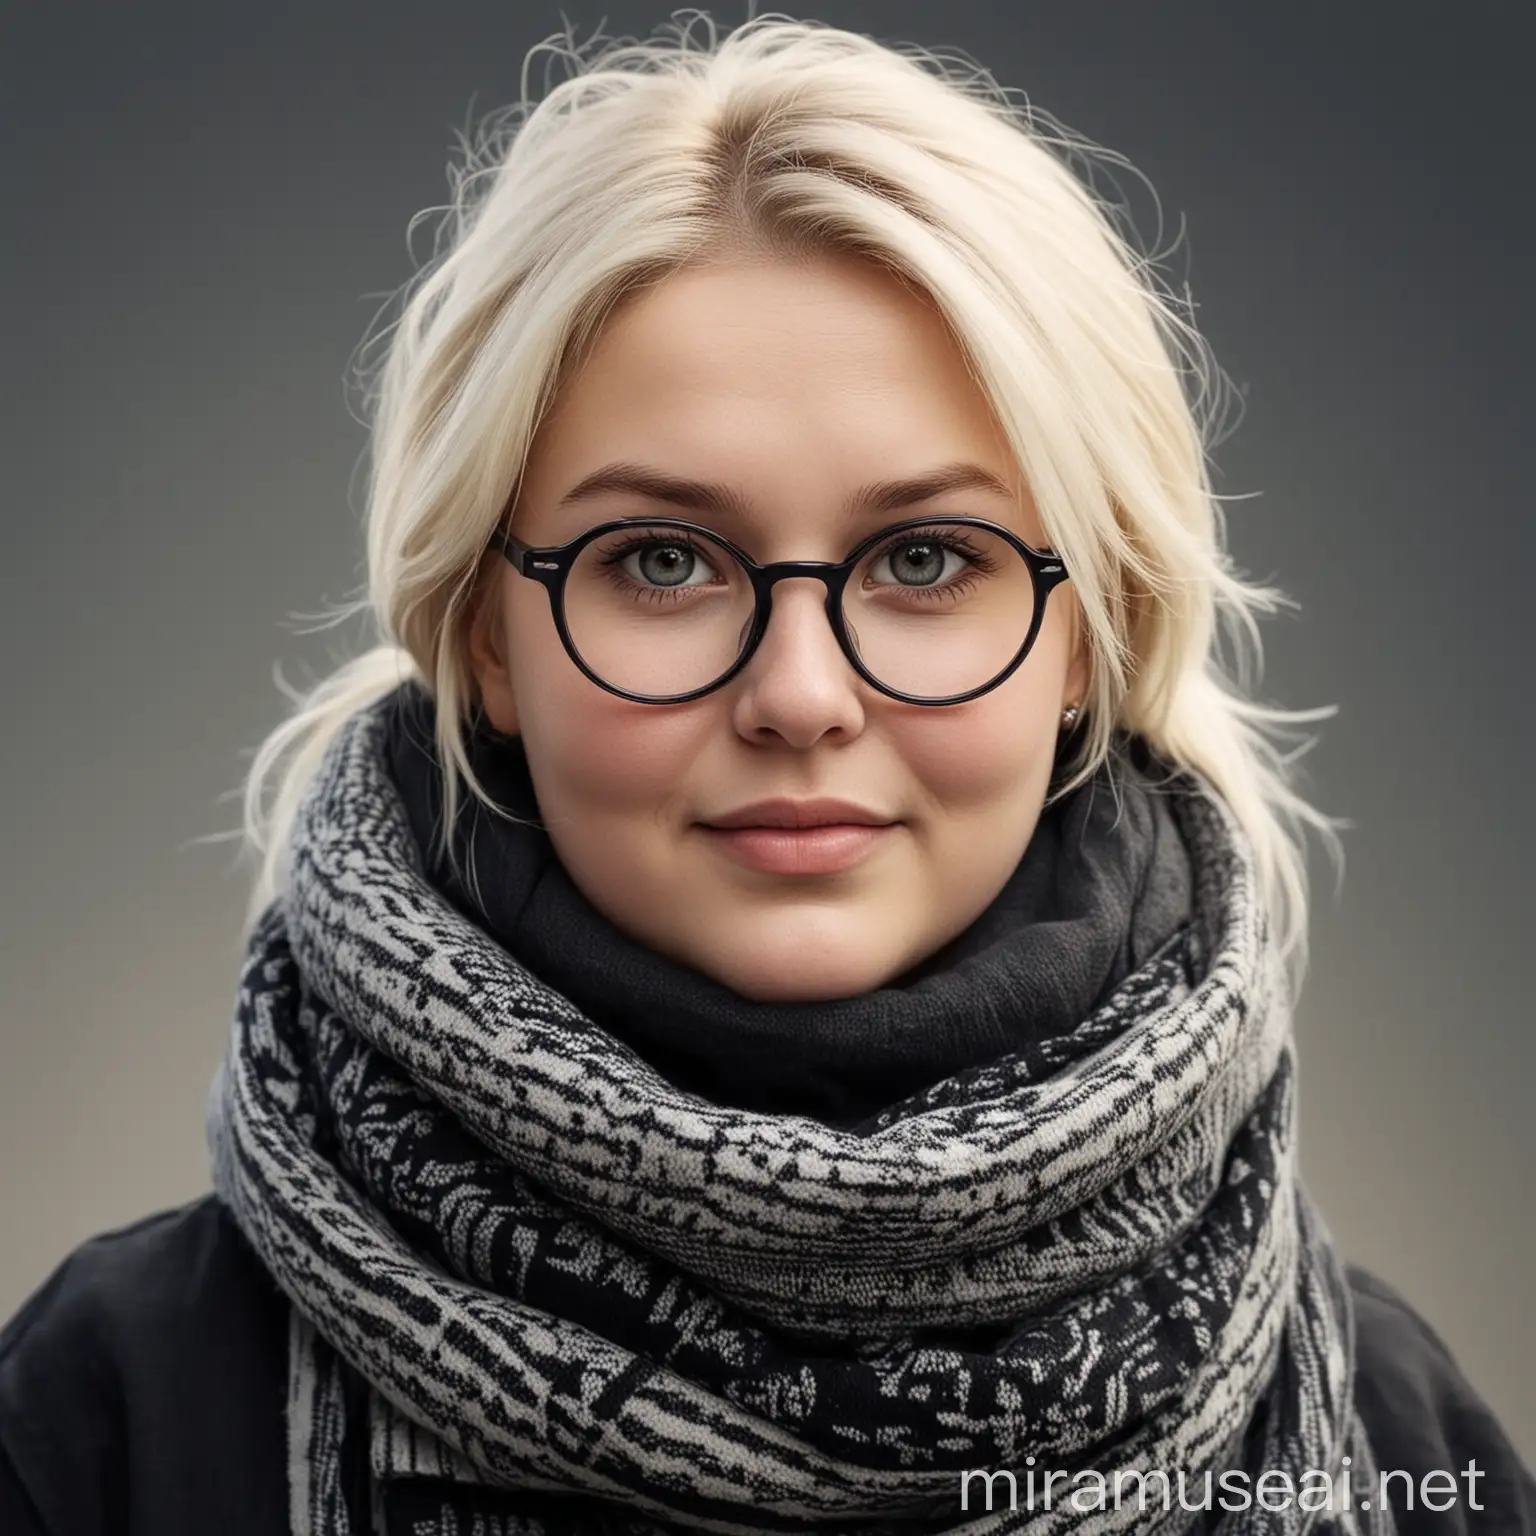 Charming Chubby Woman with Stylish Glasses and Cozy Scarf